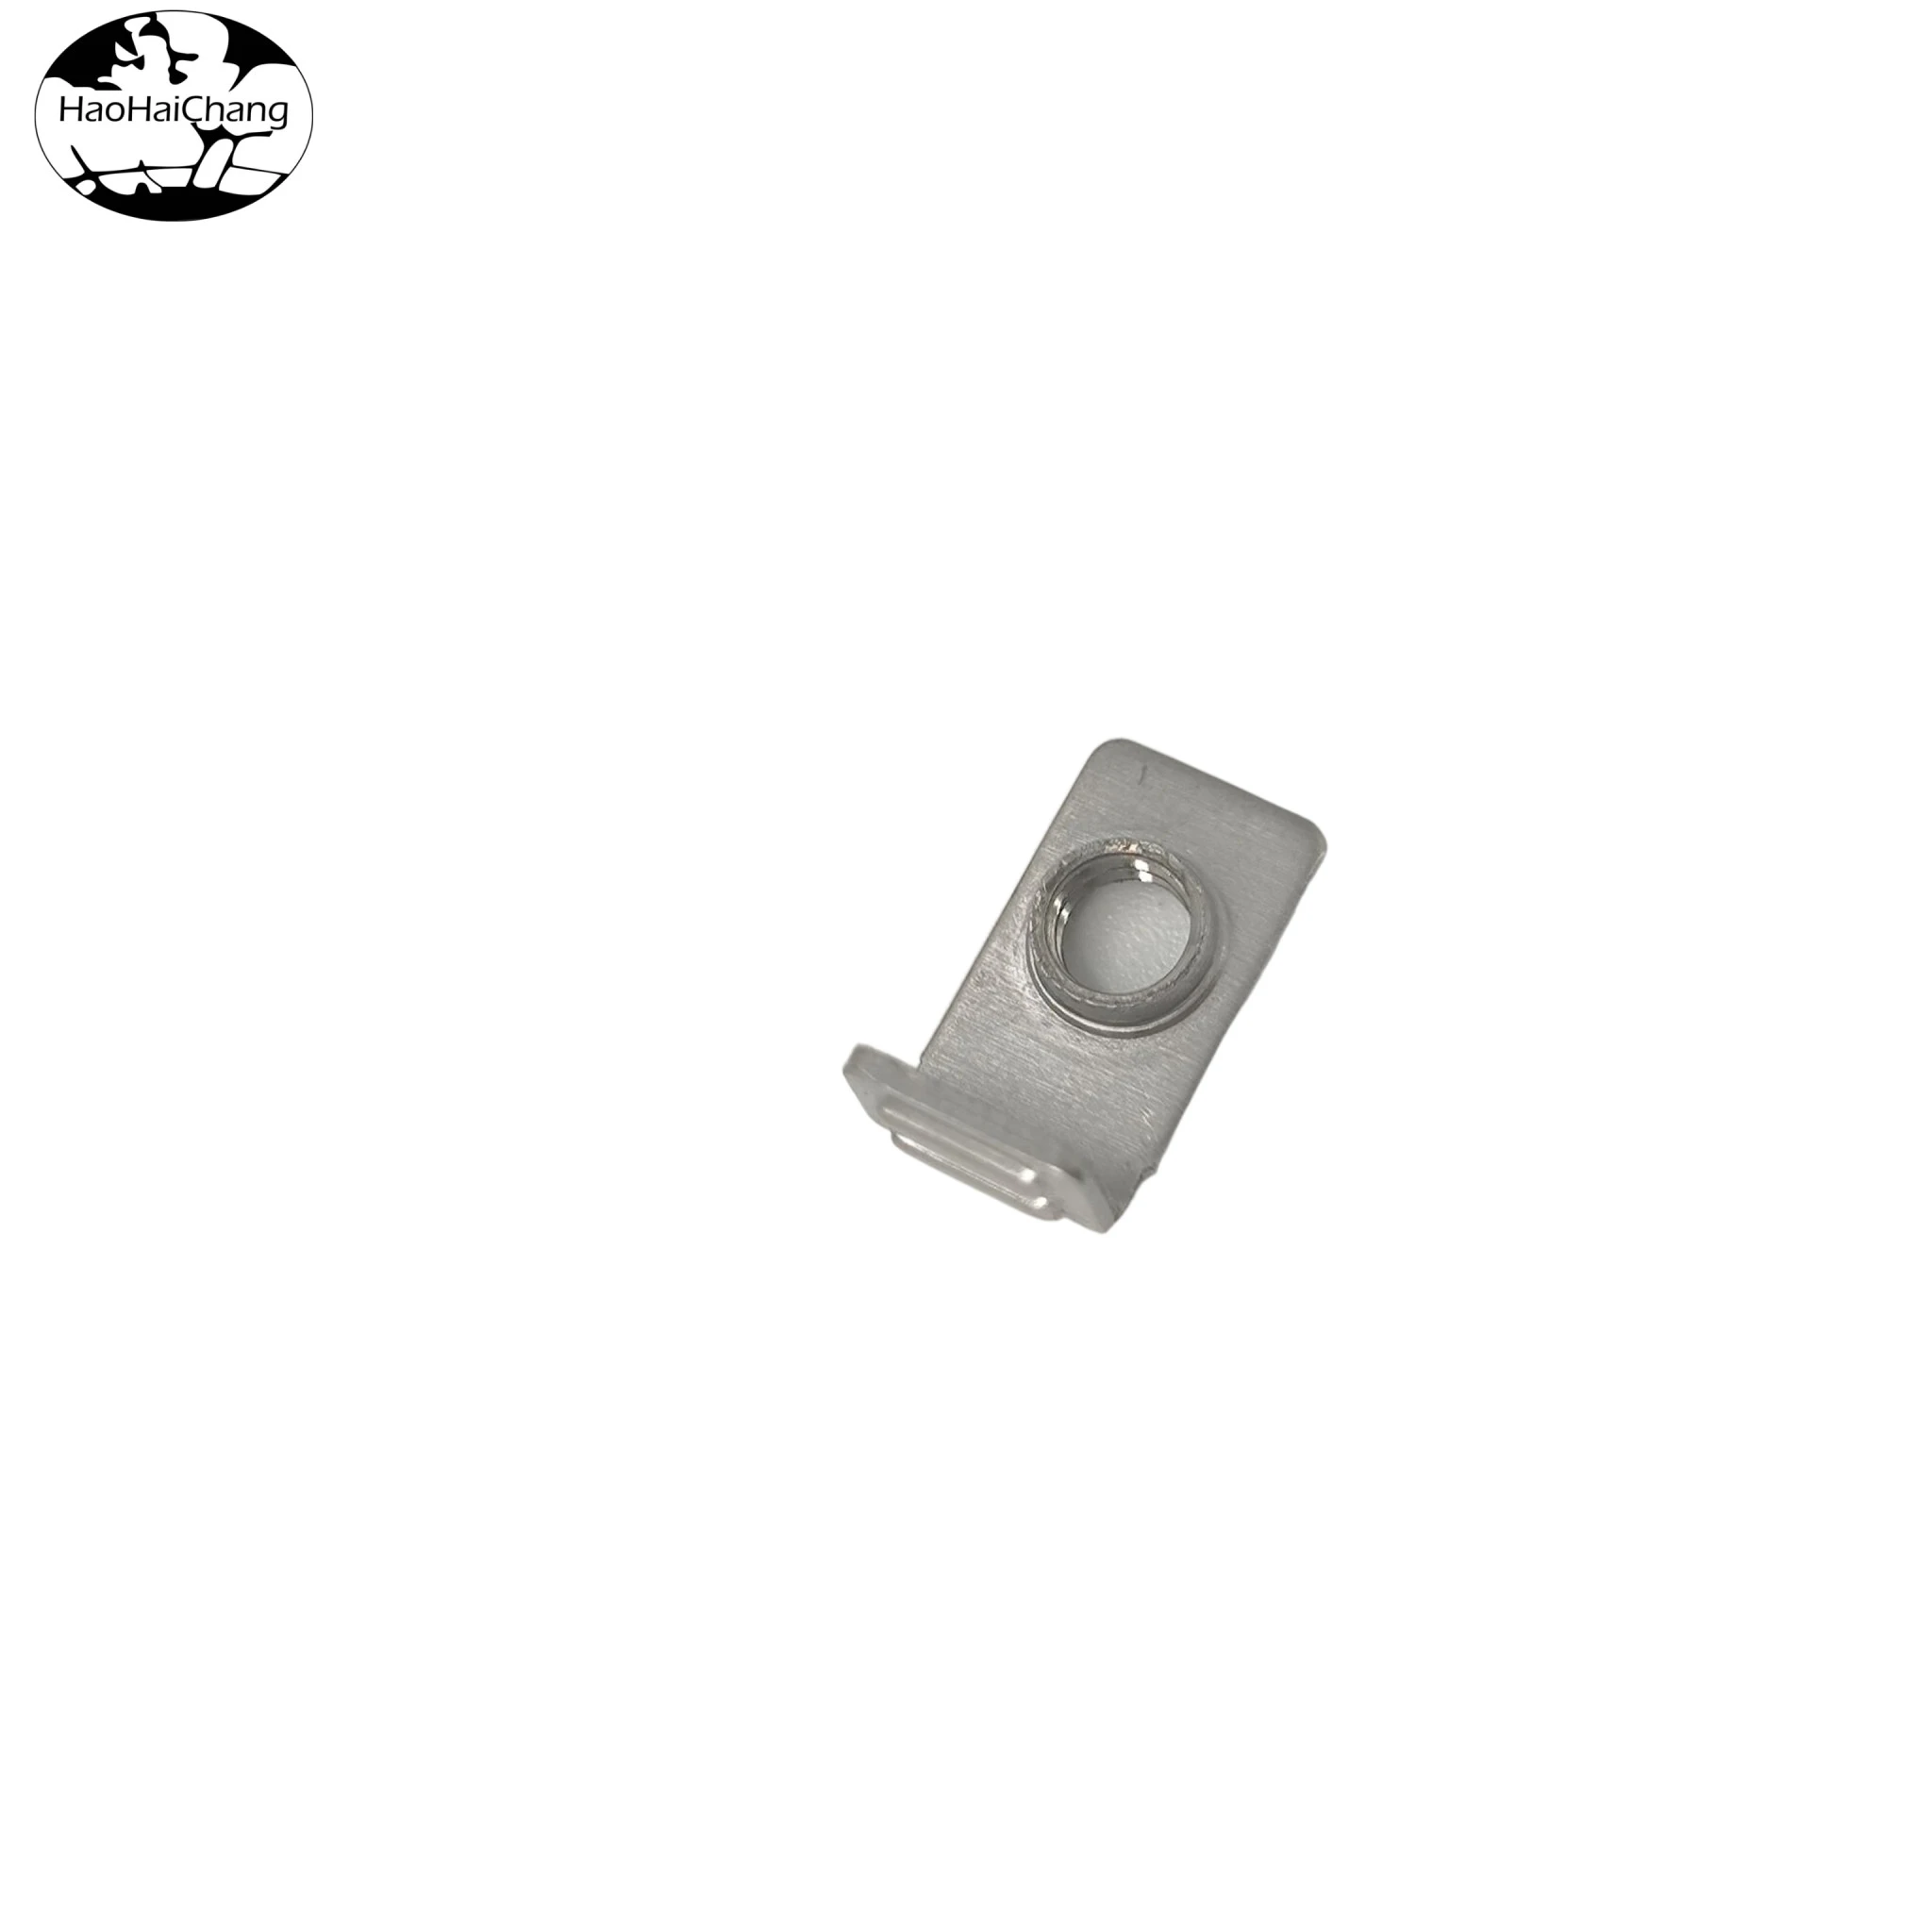 HHC-333 M4 flanged stainless steel right-angle bend terminal welding lug